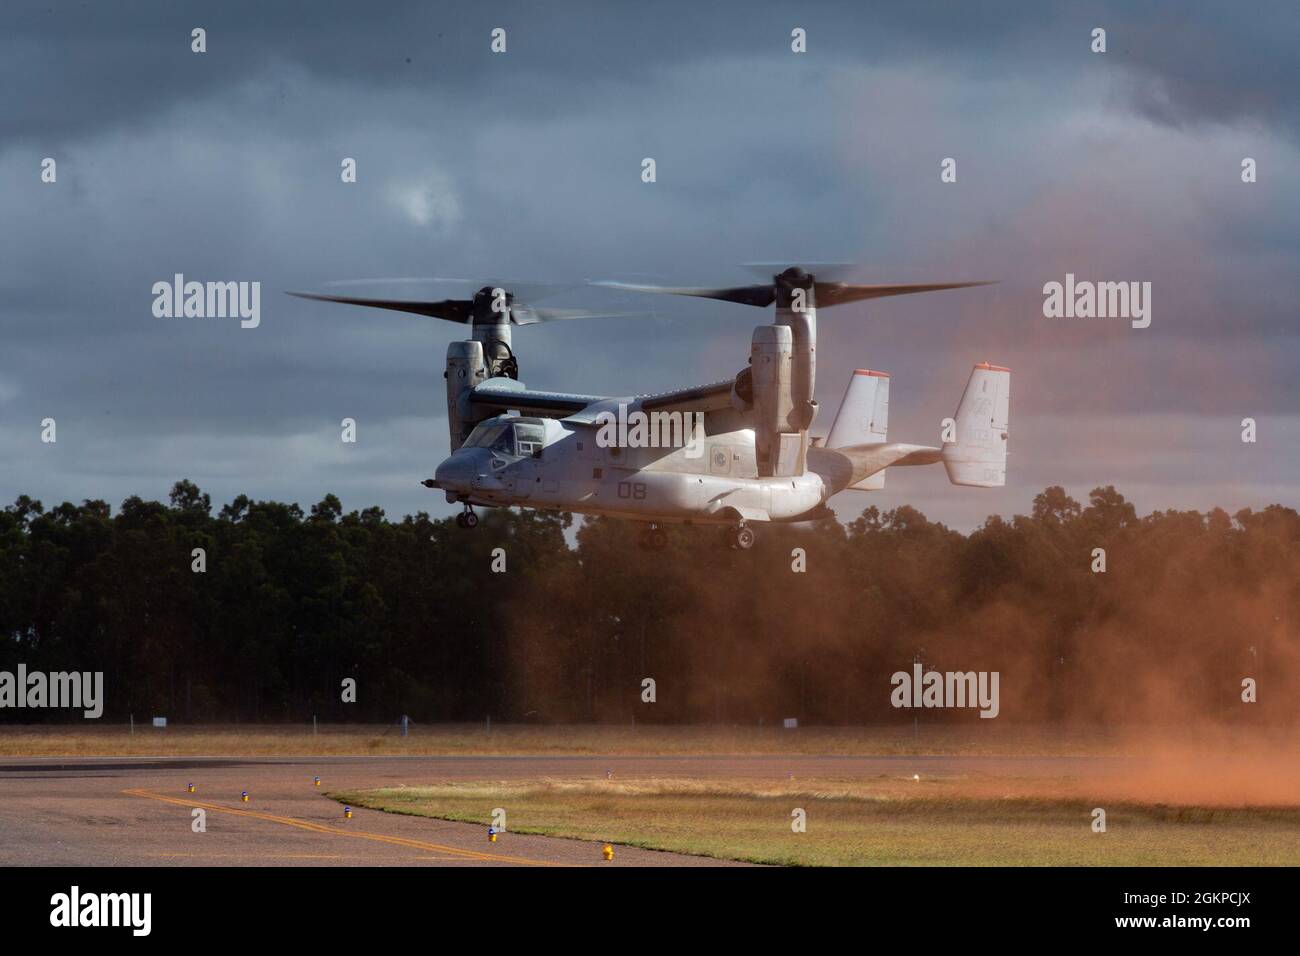 An MV-22B Osprey with Marine Rotational Force – Darwin, descends to the runway during Exercise Darrandarra at Gove Airport, Nhulunbuy, NT, Australia, June 12, 2021. The MV-22B flew from Darwin to Nhulunbuy to deliver troops and equipment to support the exercise, demonstrating the Marine Corps’ long range airborne operation capabilities. Darrandarra, meaning “together,” demonstrates the Marines Corps’ ability to operate with the Australian Defence Force and train to reinforce embassies in response to crisis and contingencies in the Indo-Pacific region. Stock Photo